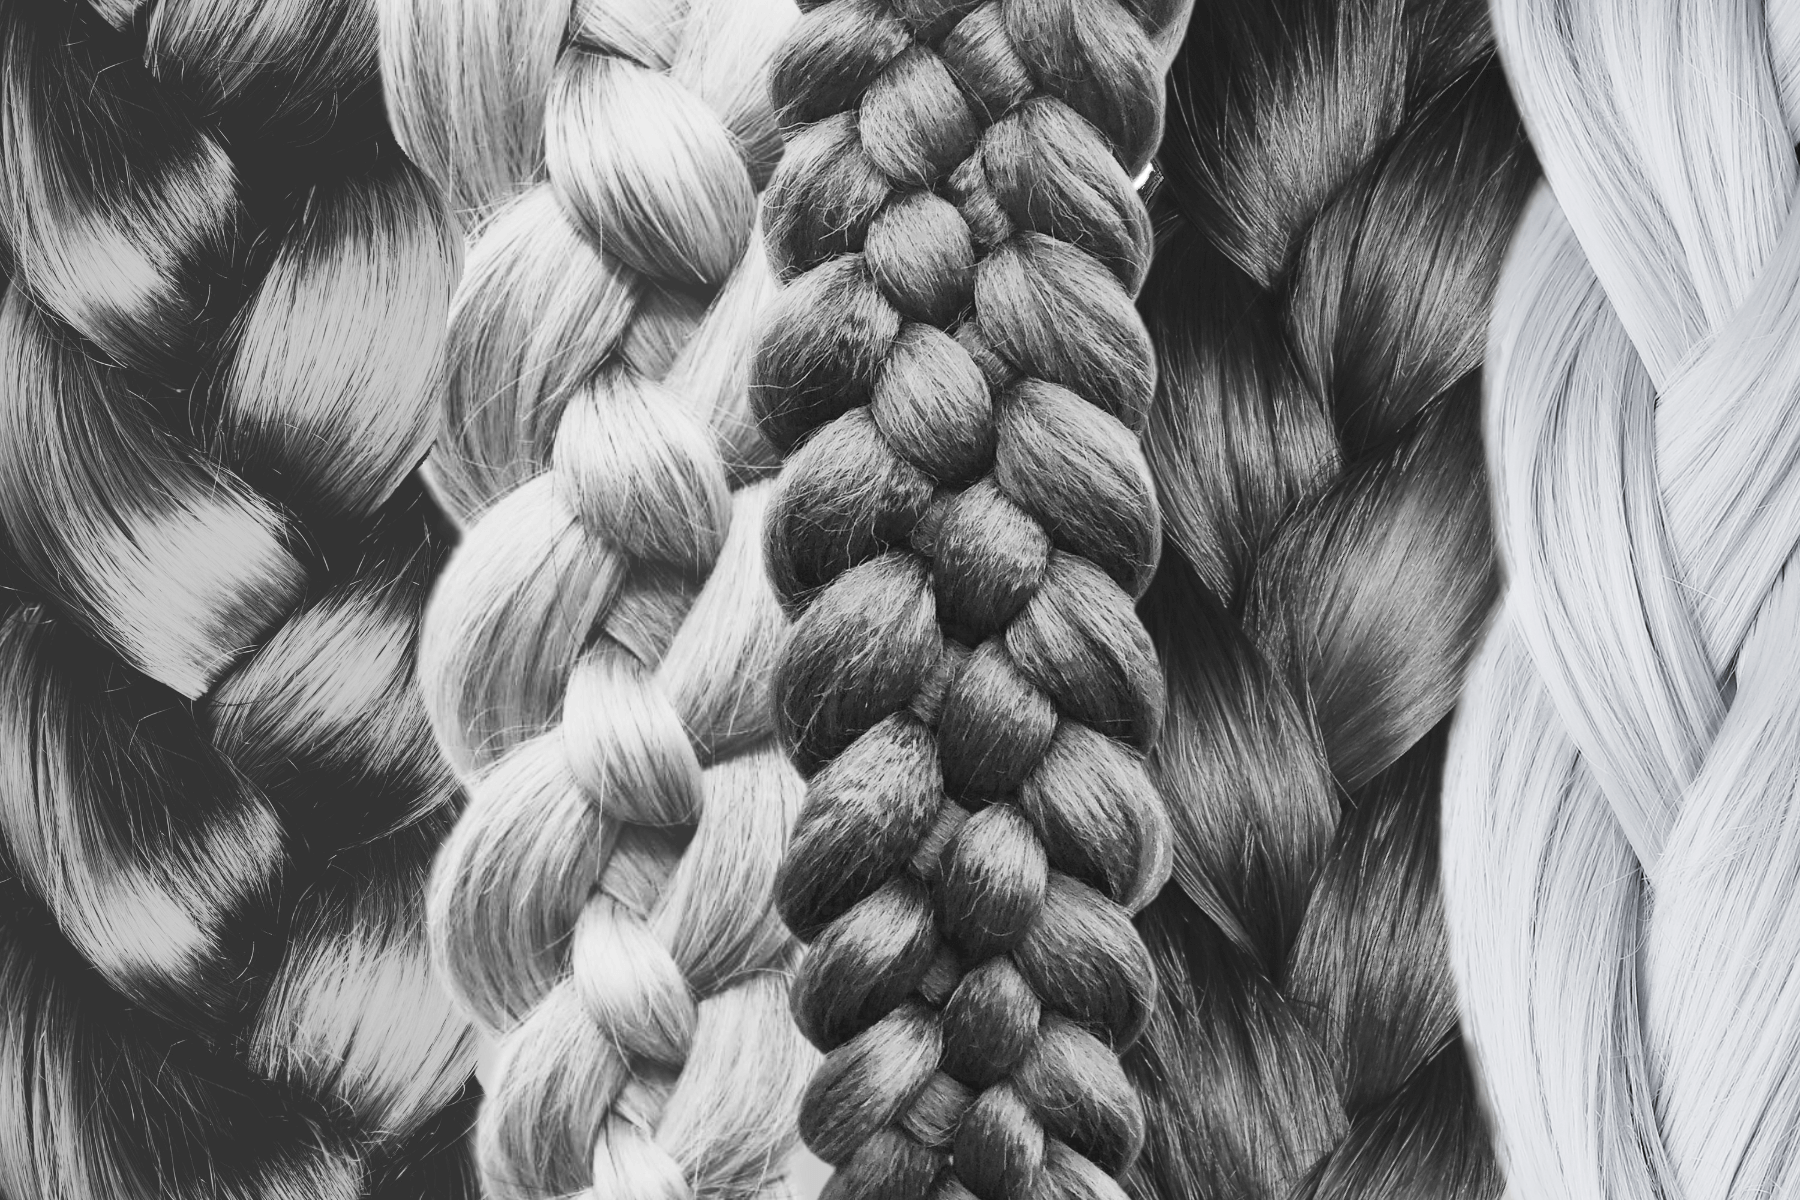 Learn these 5 Braid Techniques